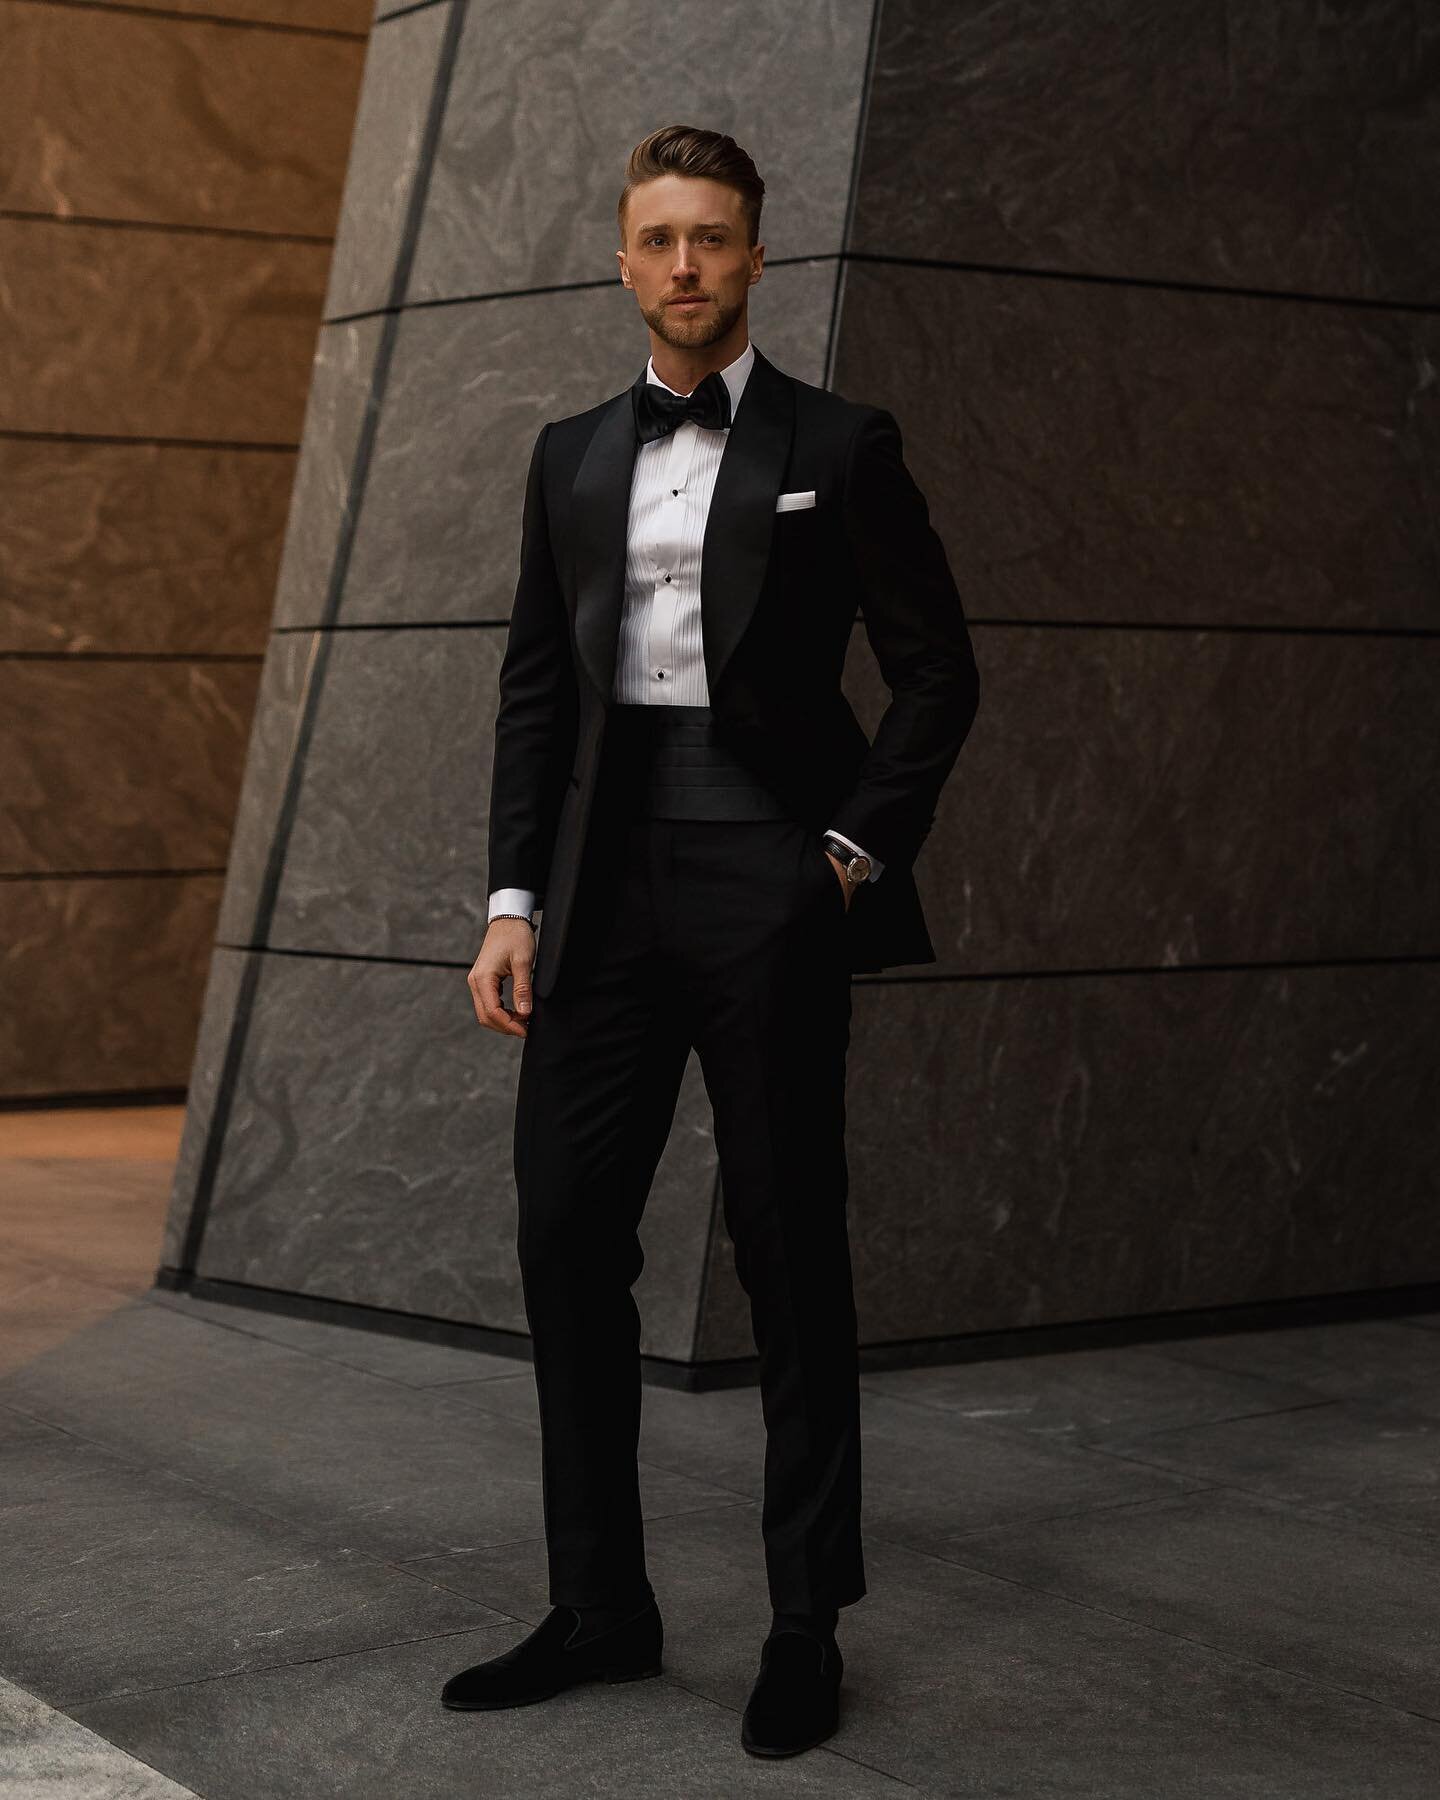 Far from a thing of the past, the tuxedo is one of the most essential staples a man can have in his closet. The pinnacle of sartorial elegance, a well-made tuxedo will last a lifetime without ever going out of style, and always comes in handy when th